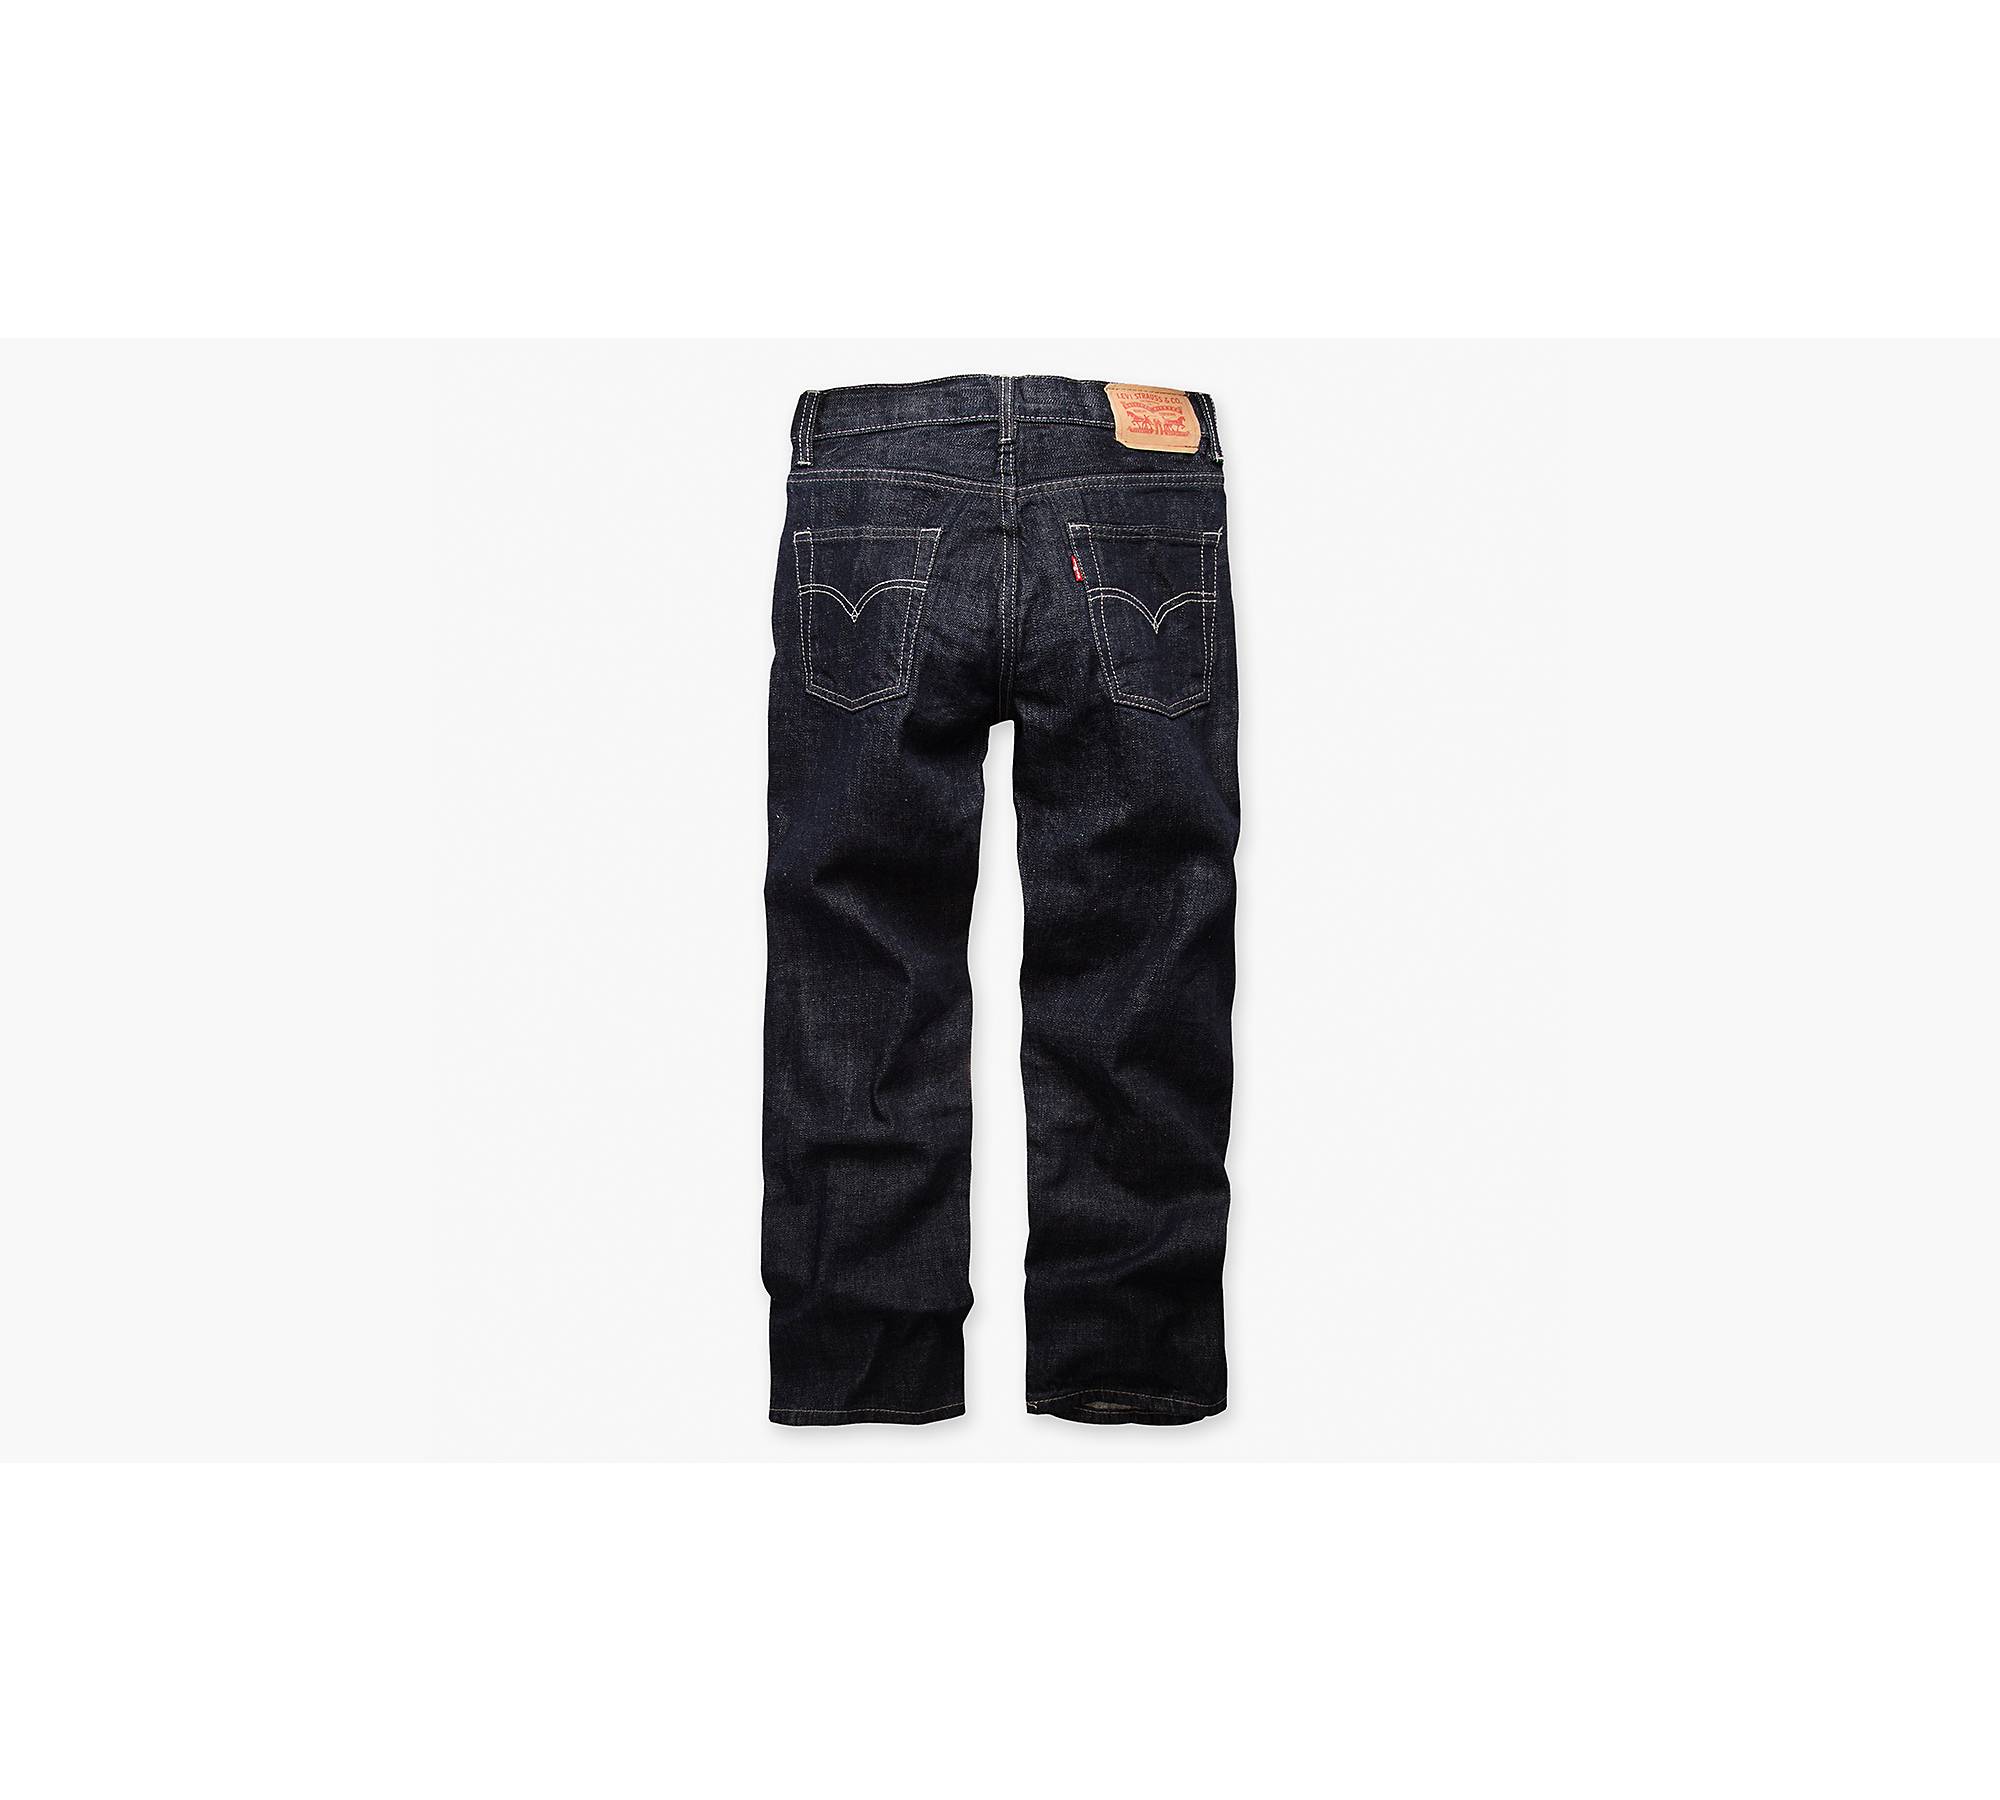 550™ Relaxed Fit Big Boys Jeans 8-20 (husky) - Grey